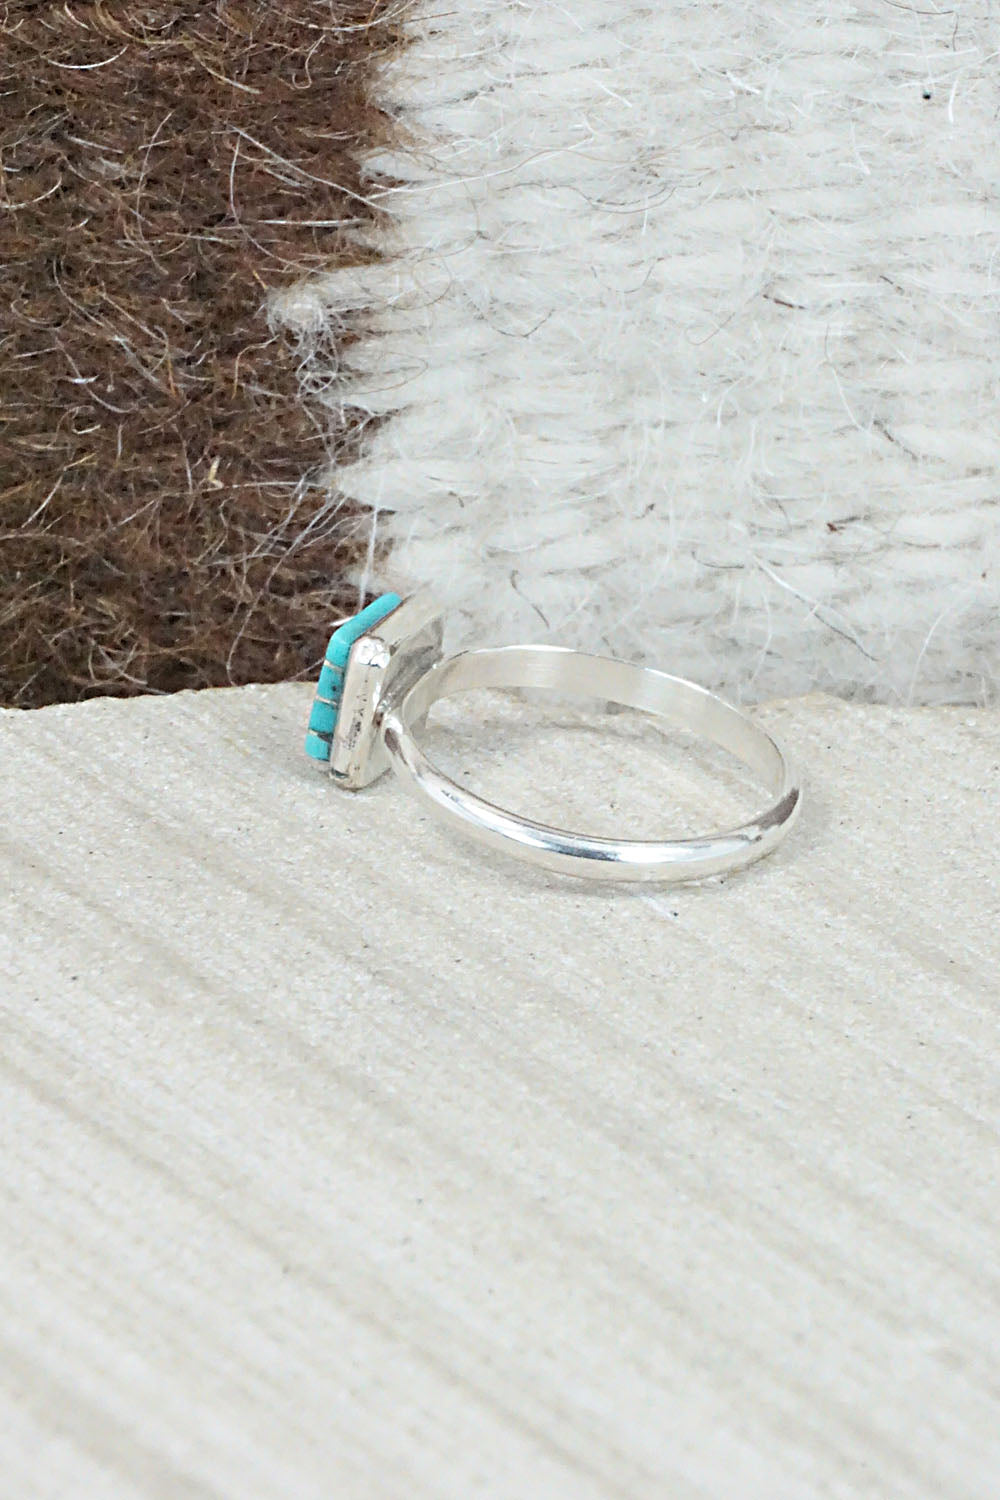 Turquoise & Sterling Silver Ring - Janelle Shebola - Size 5.5